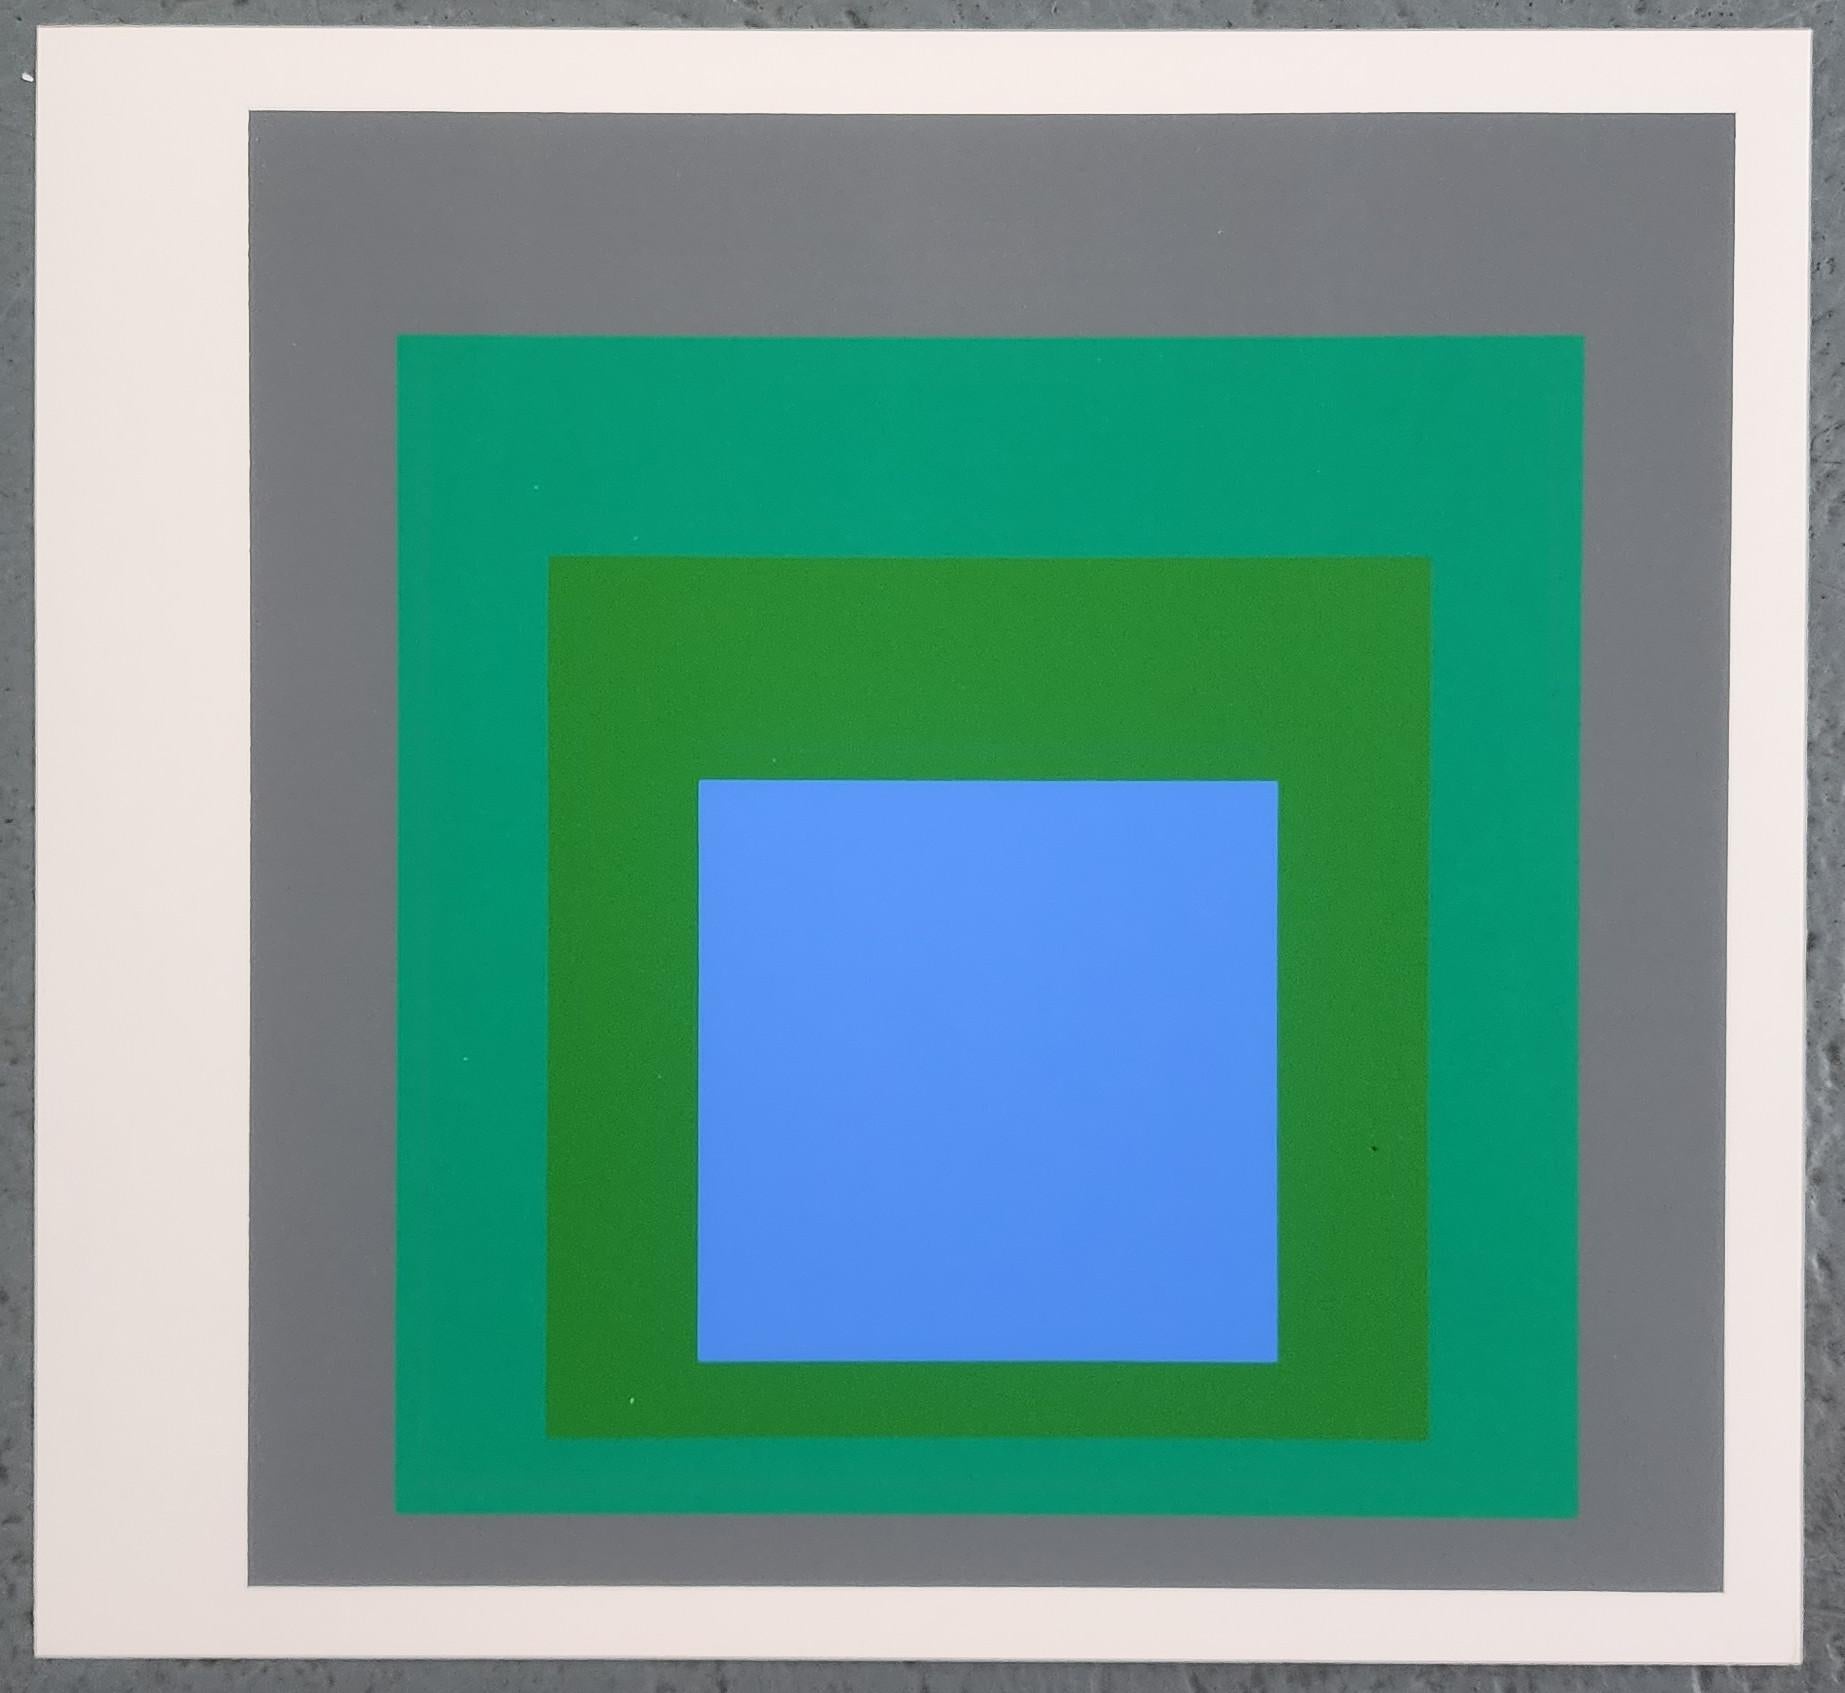 Homage to the Square: Blue Look (Bauhaus, Minimalism, 50% OFF LIST PRICE) - Modern Print by (after) Josef Albers